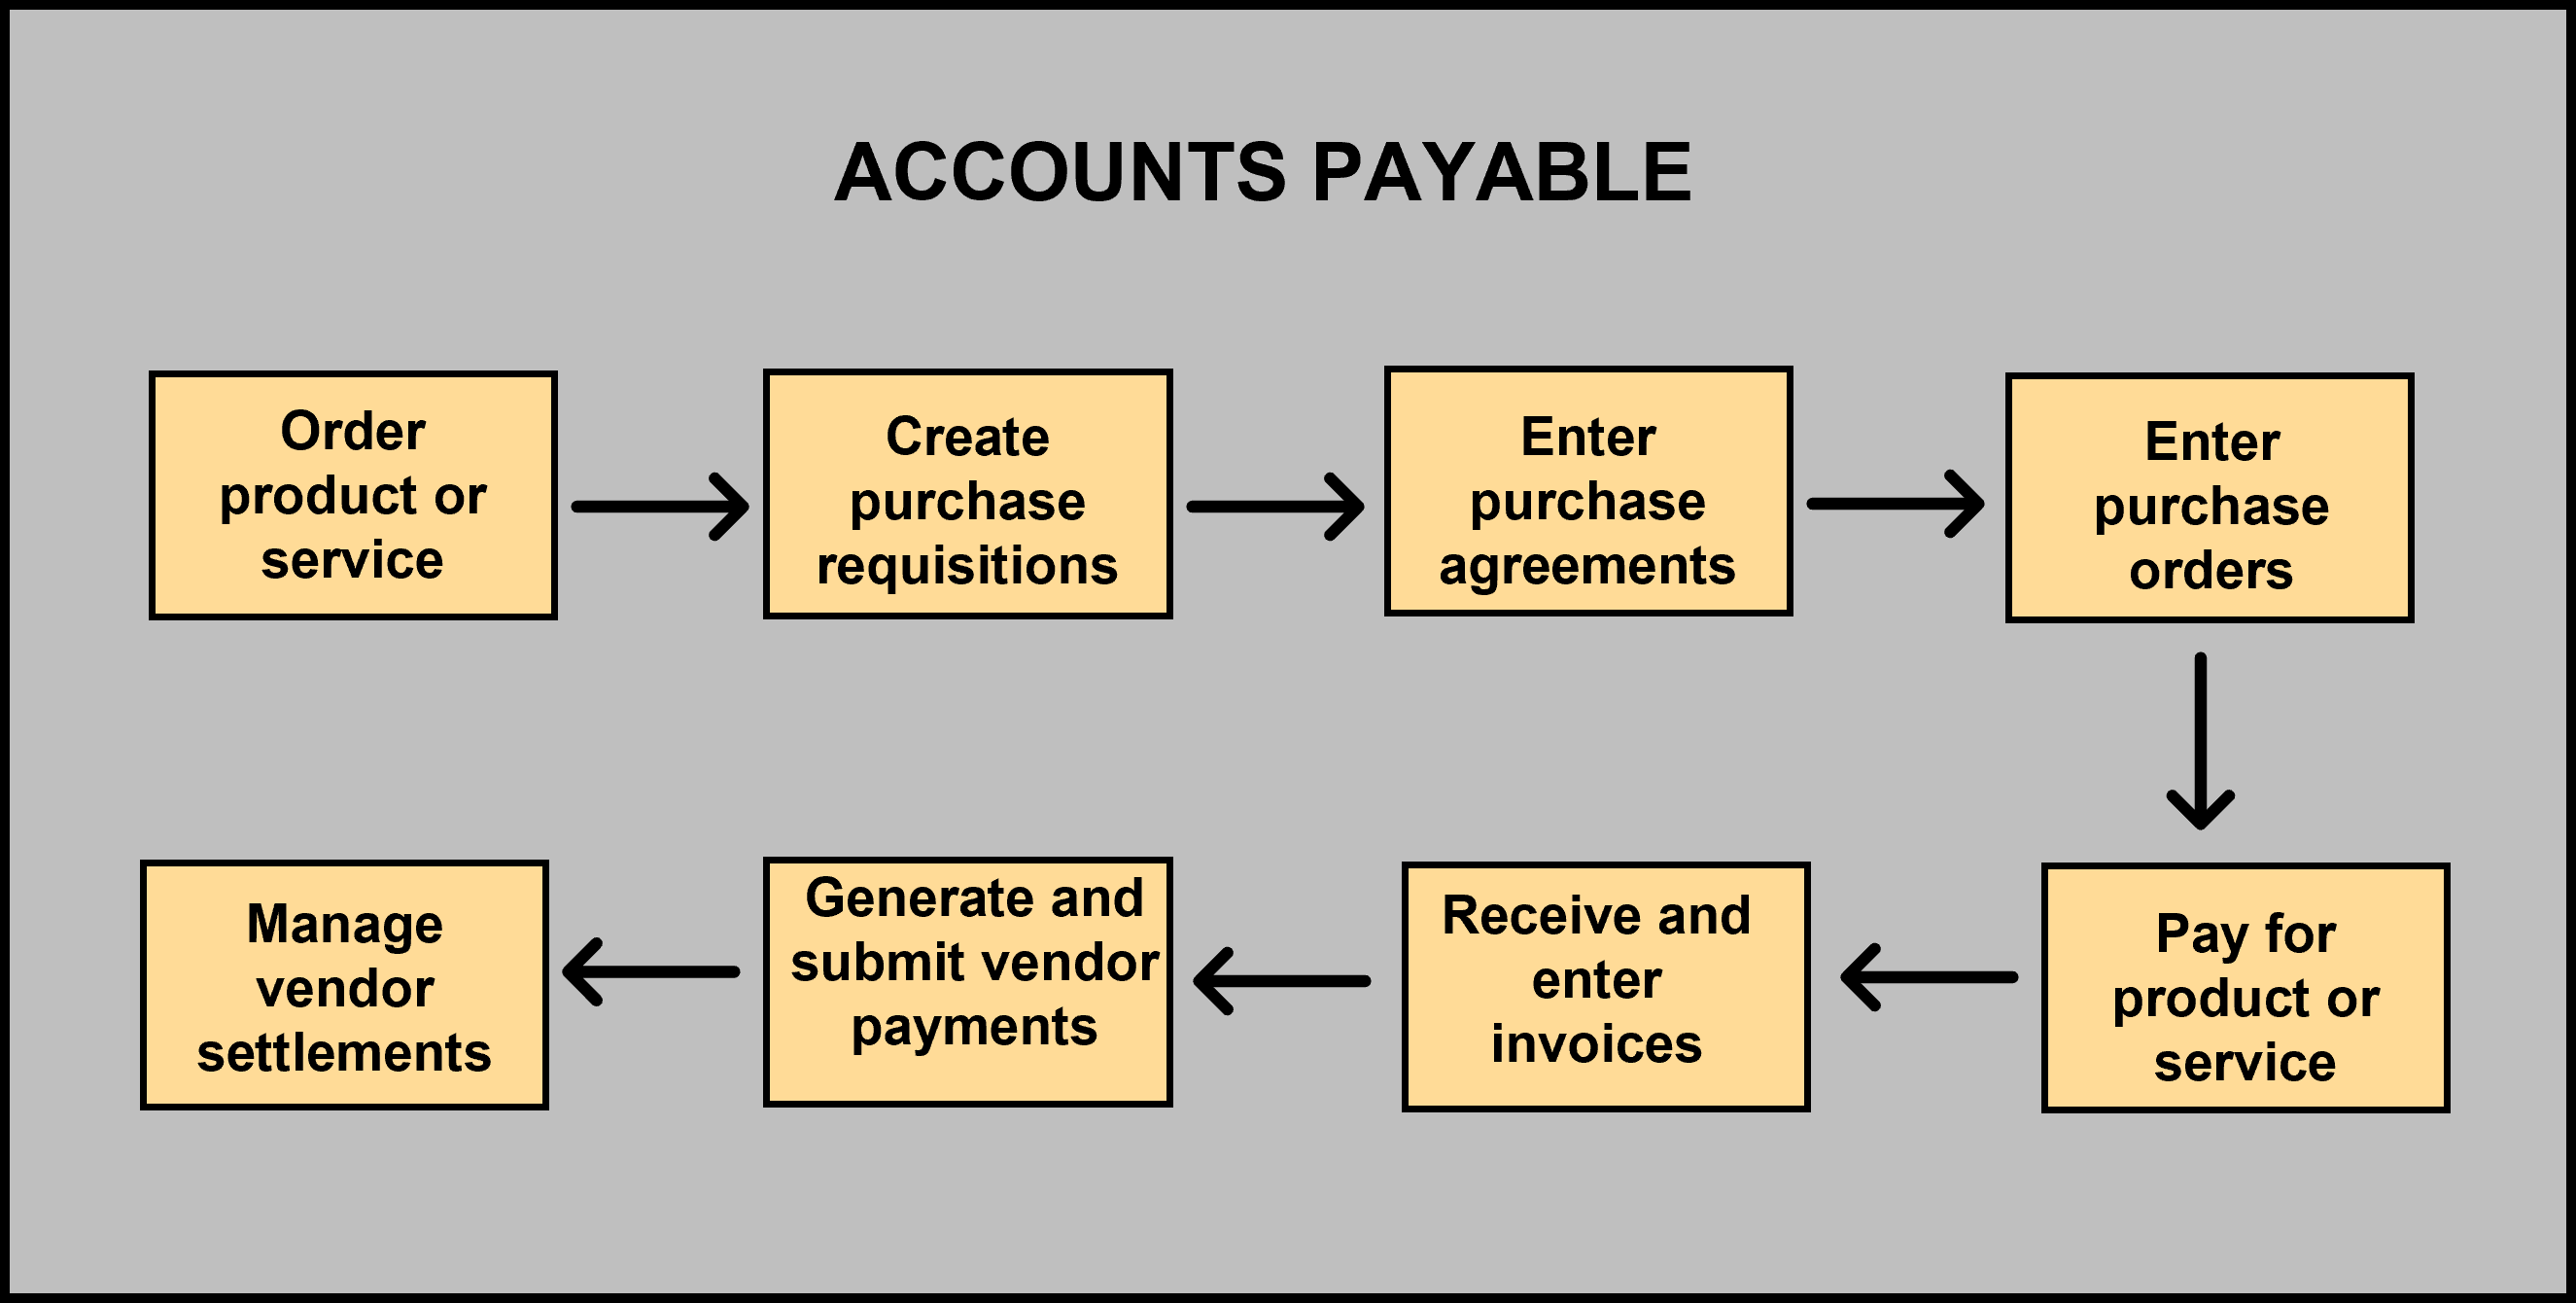 Diagram depicts the Accounts payable business processes: order product or service, create purchase requisitions, enter purchase agreements, enter purchase orders, pay for product or service, receive and enter invoices, generate and submit vendor payments, and manage vendor settlements.